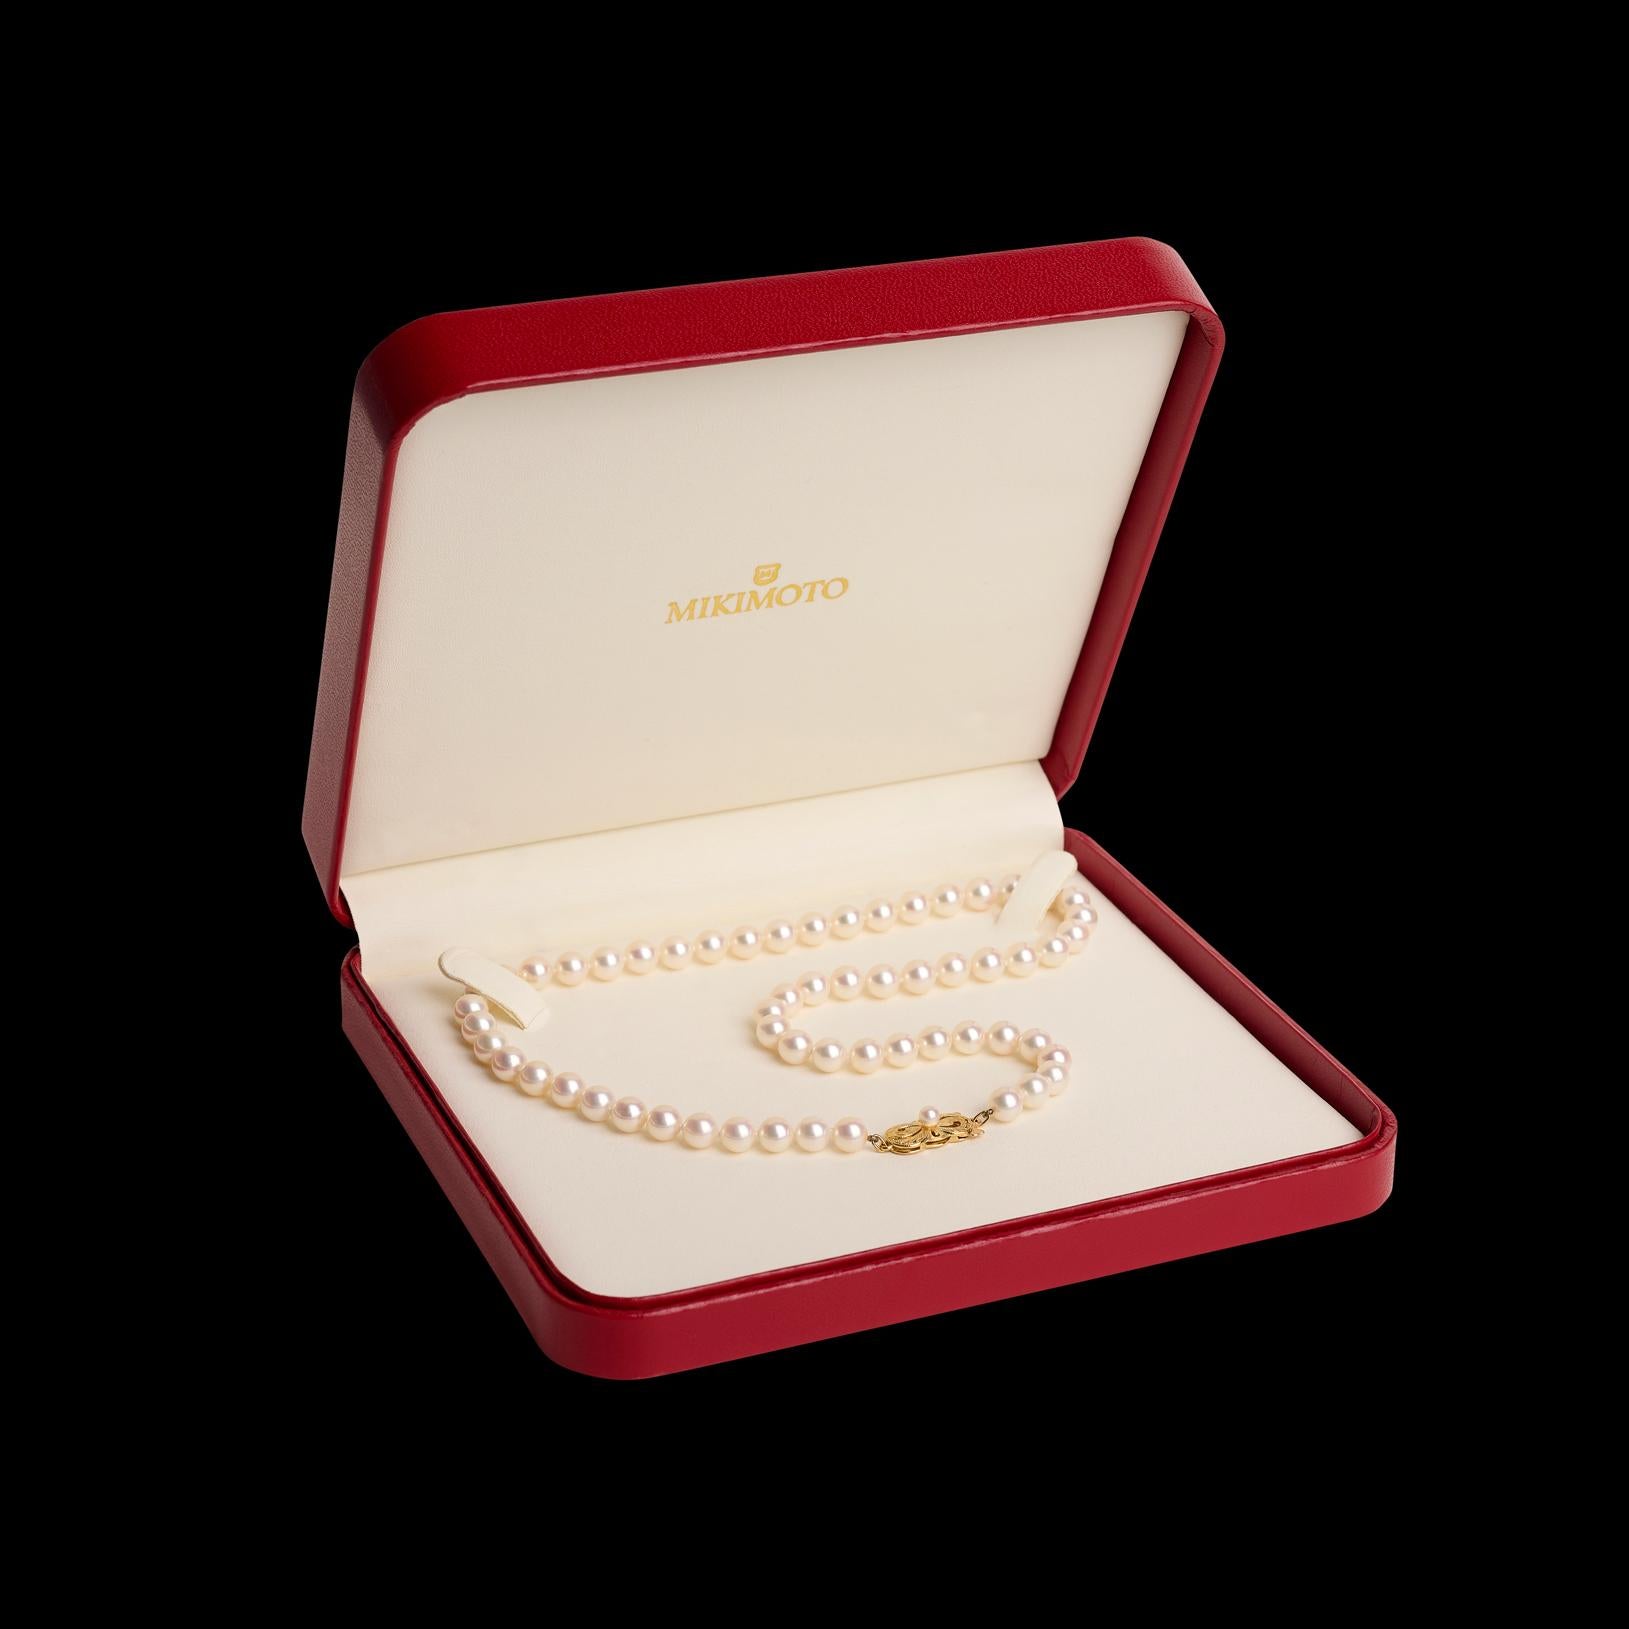 They say that pearls are making a comeback, and this Mikimoto pearl necklace might be just what you've been looking for. At 16